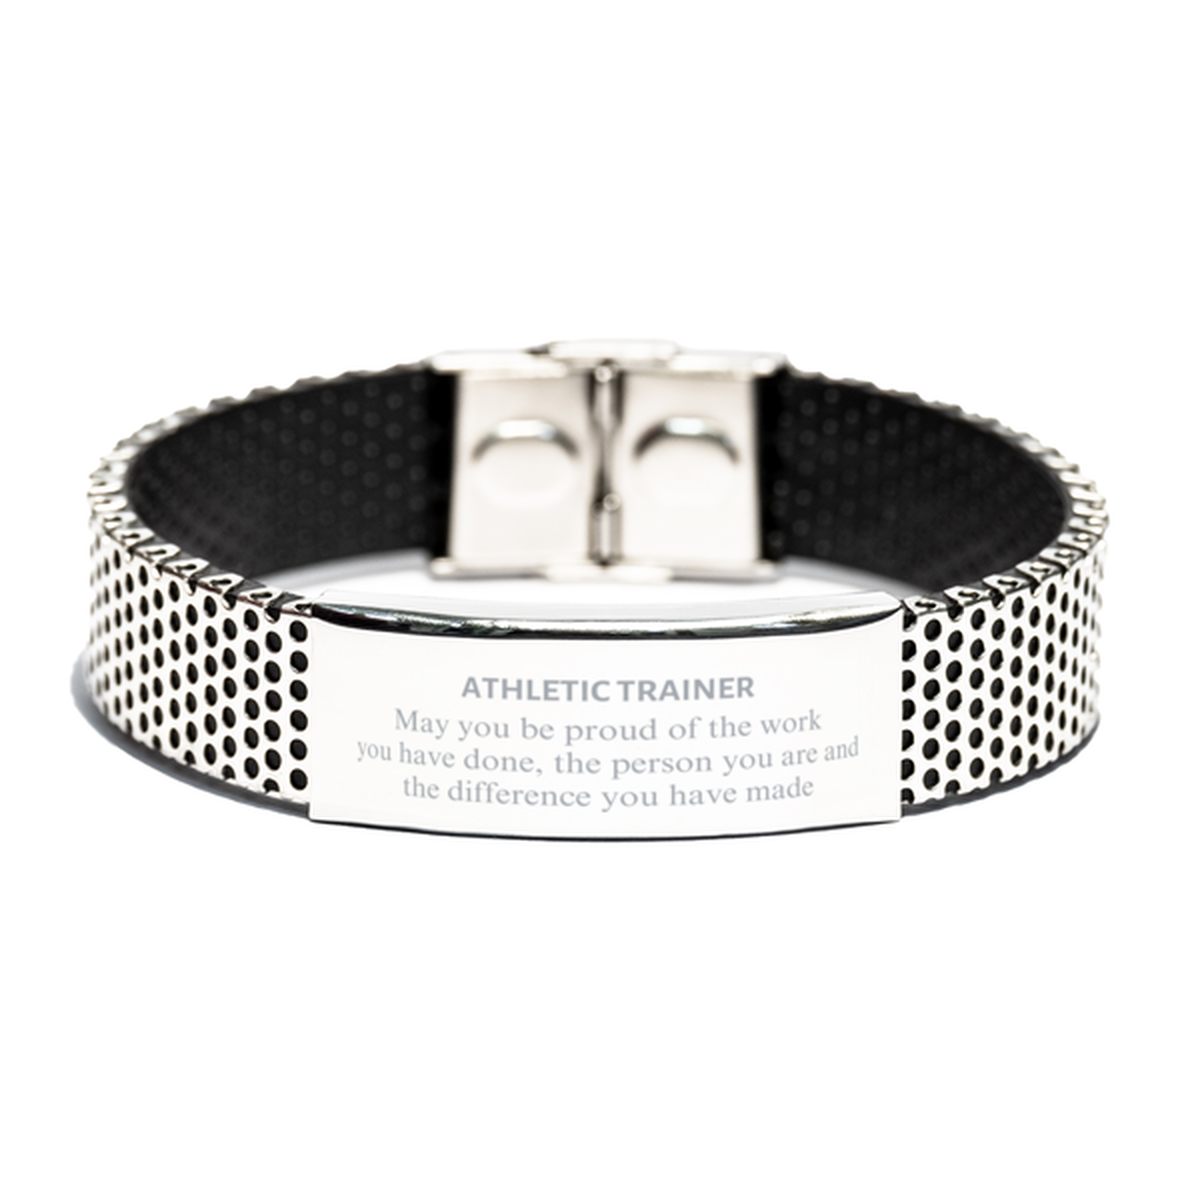 Athletic Trainer May you be proud of the work you have done, Retirement Athletic Trainer Stainless Steel Bracelet for Colleague Appreciation Gifts Amazing for Athletic Trainer